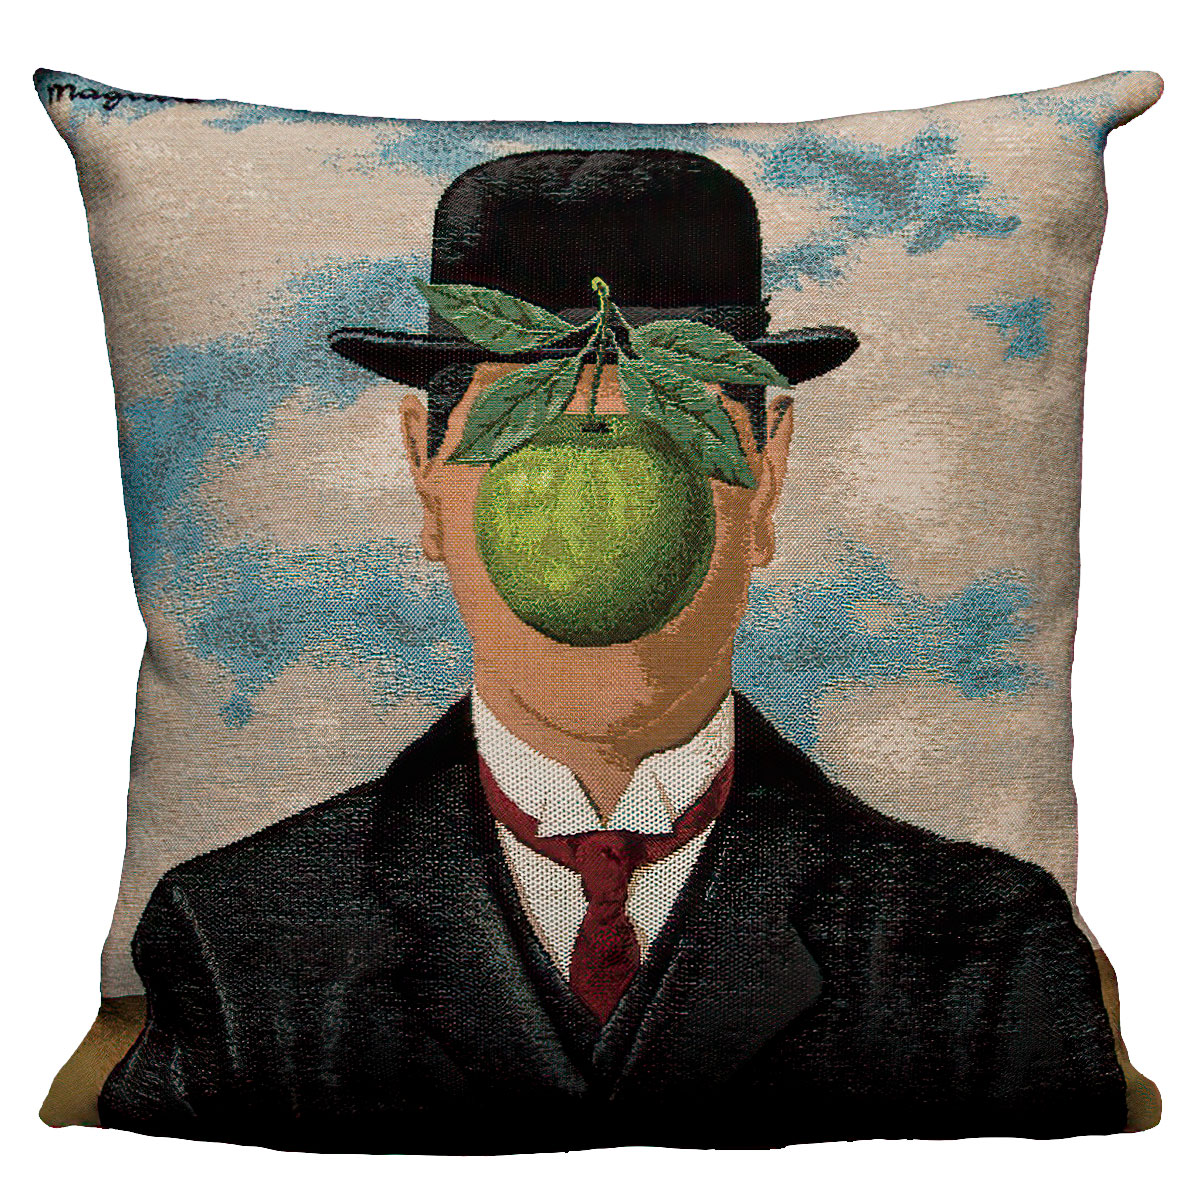 René Magritte Cushion cover : The Son of Man (1964), made in France